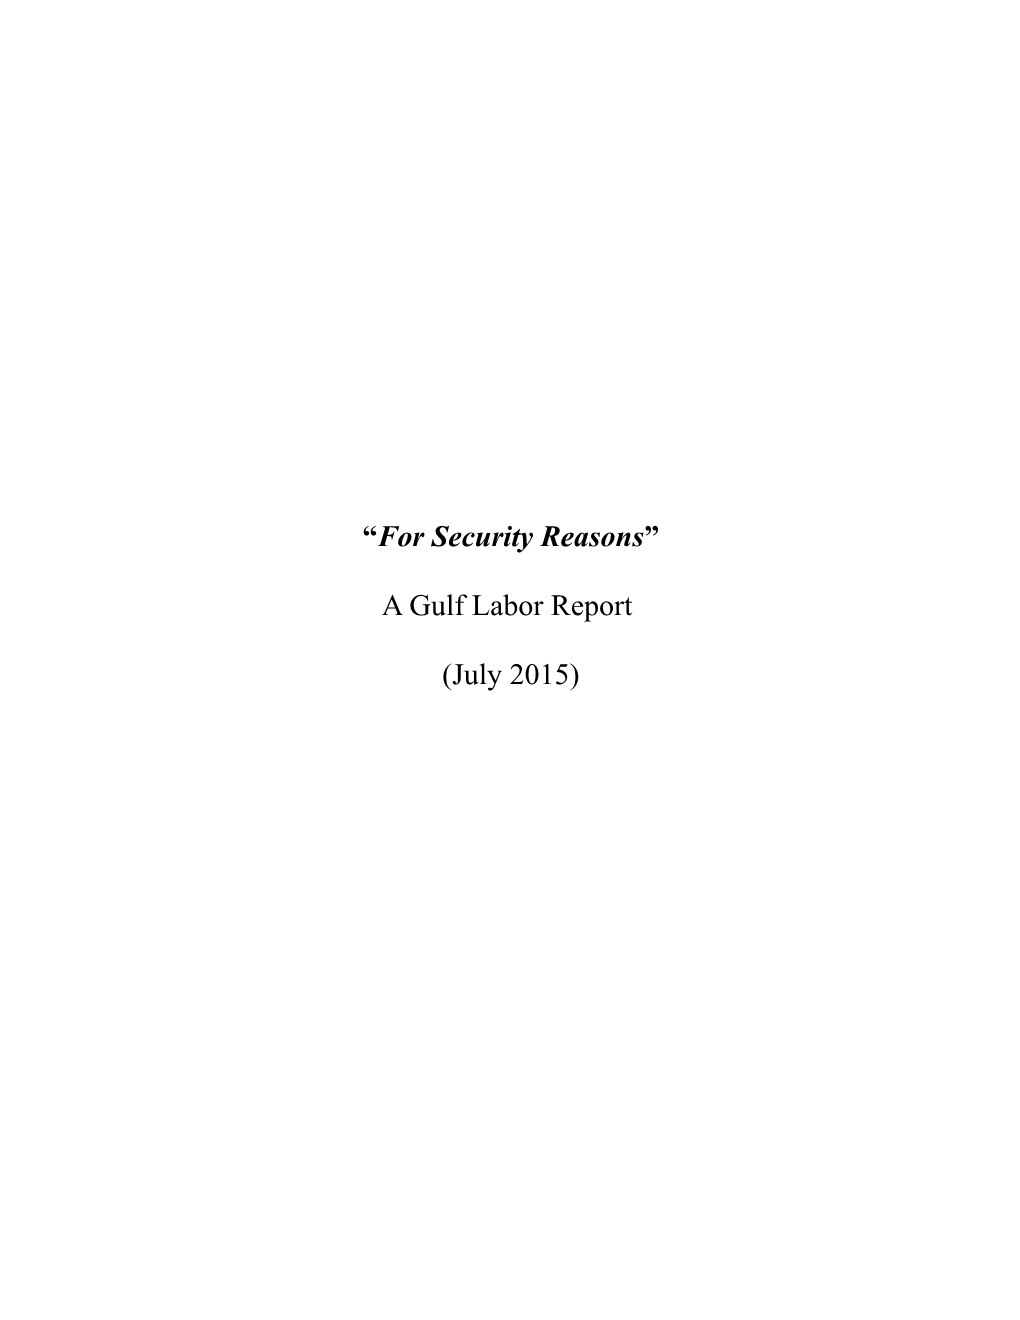 “For Security Reasons” a Gulf Labor Report (July 2015)